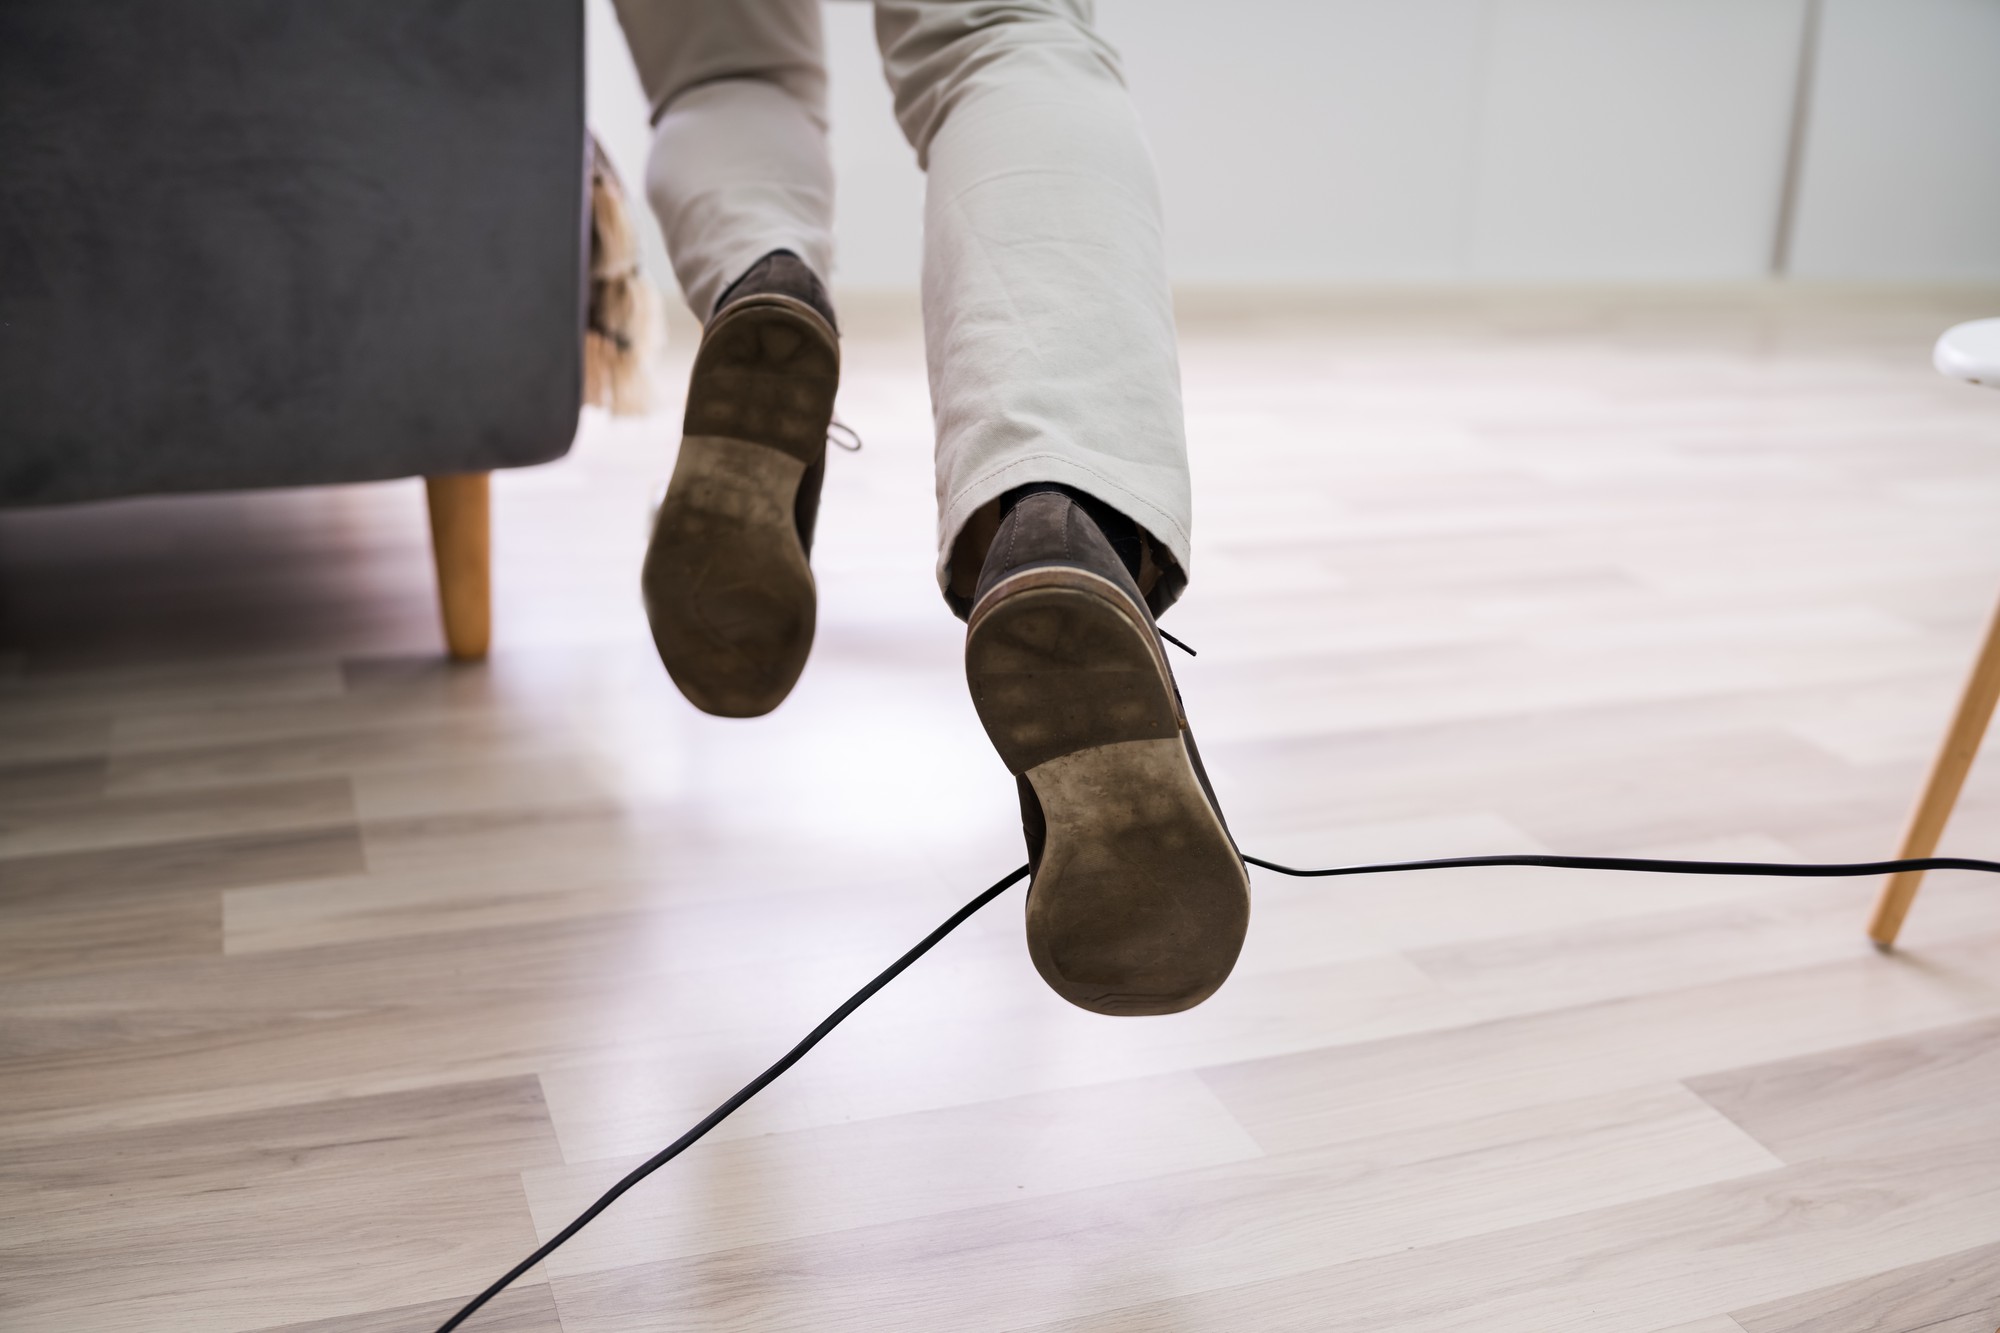 Man Legs Stumbling With An Electrical Cord